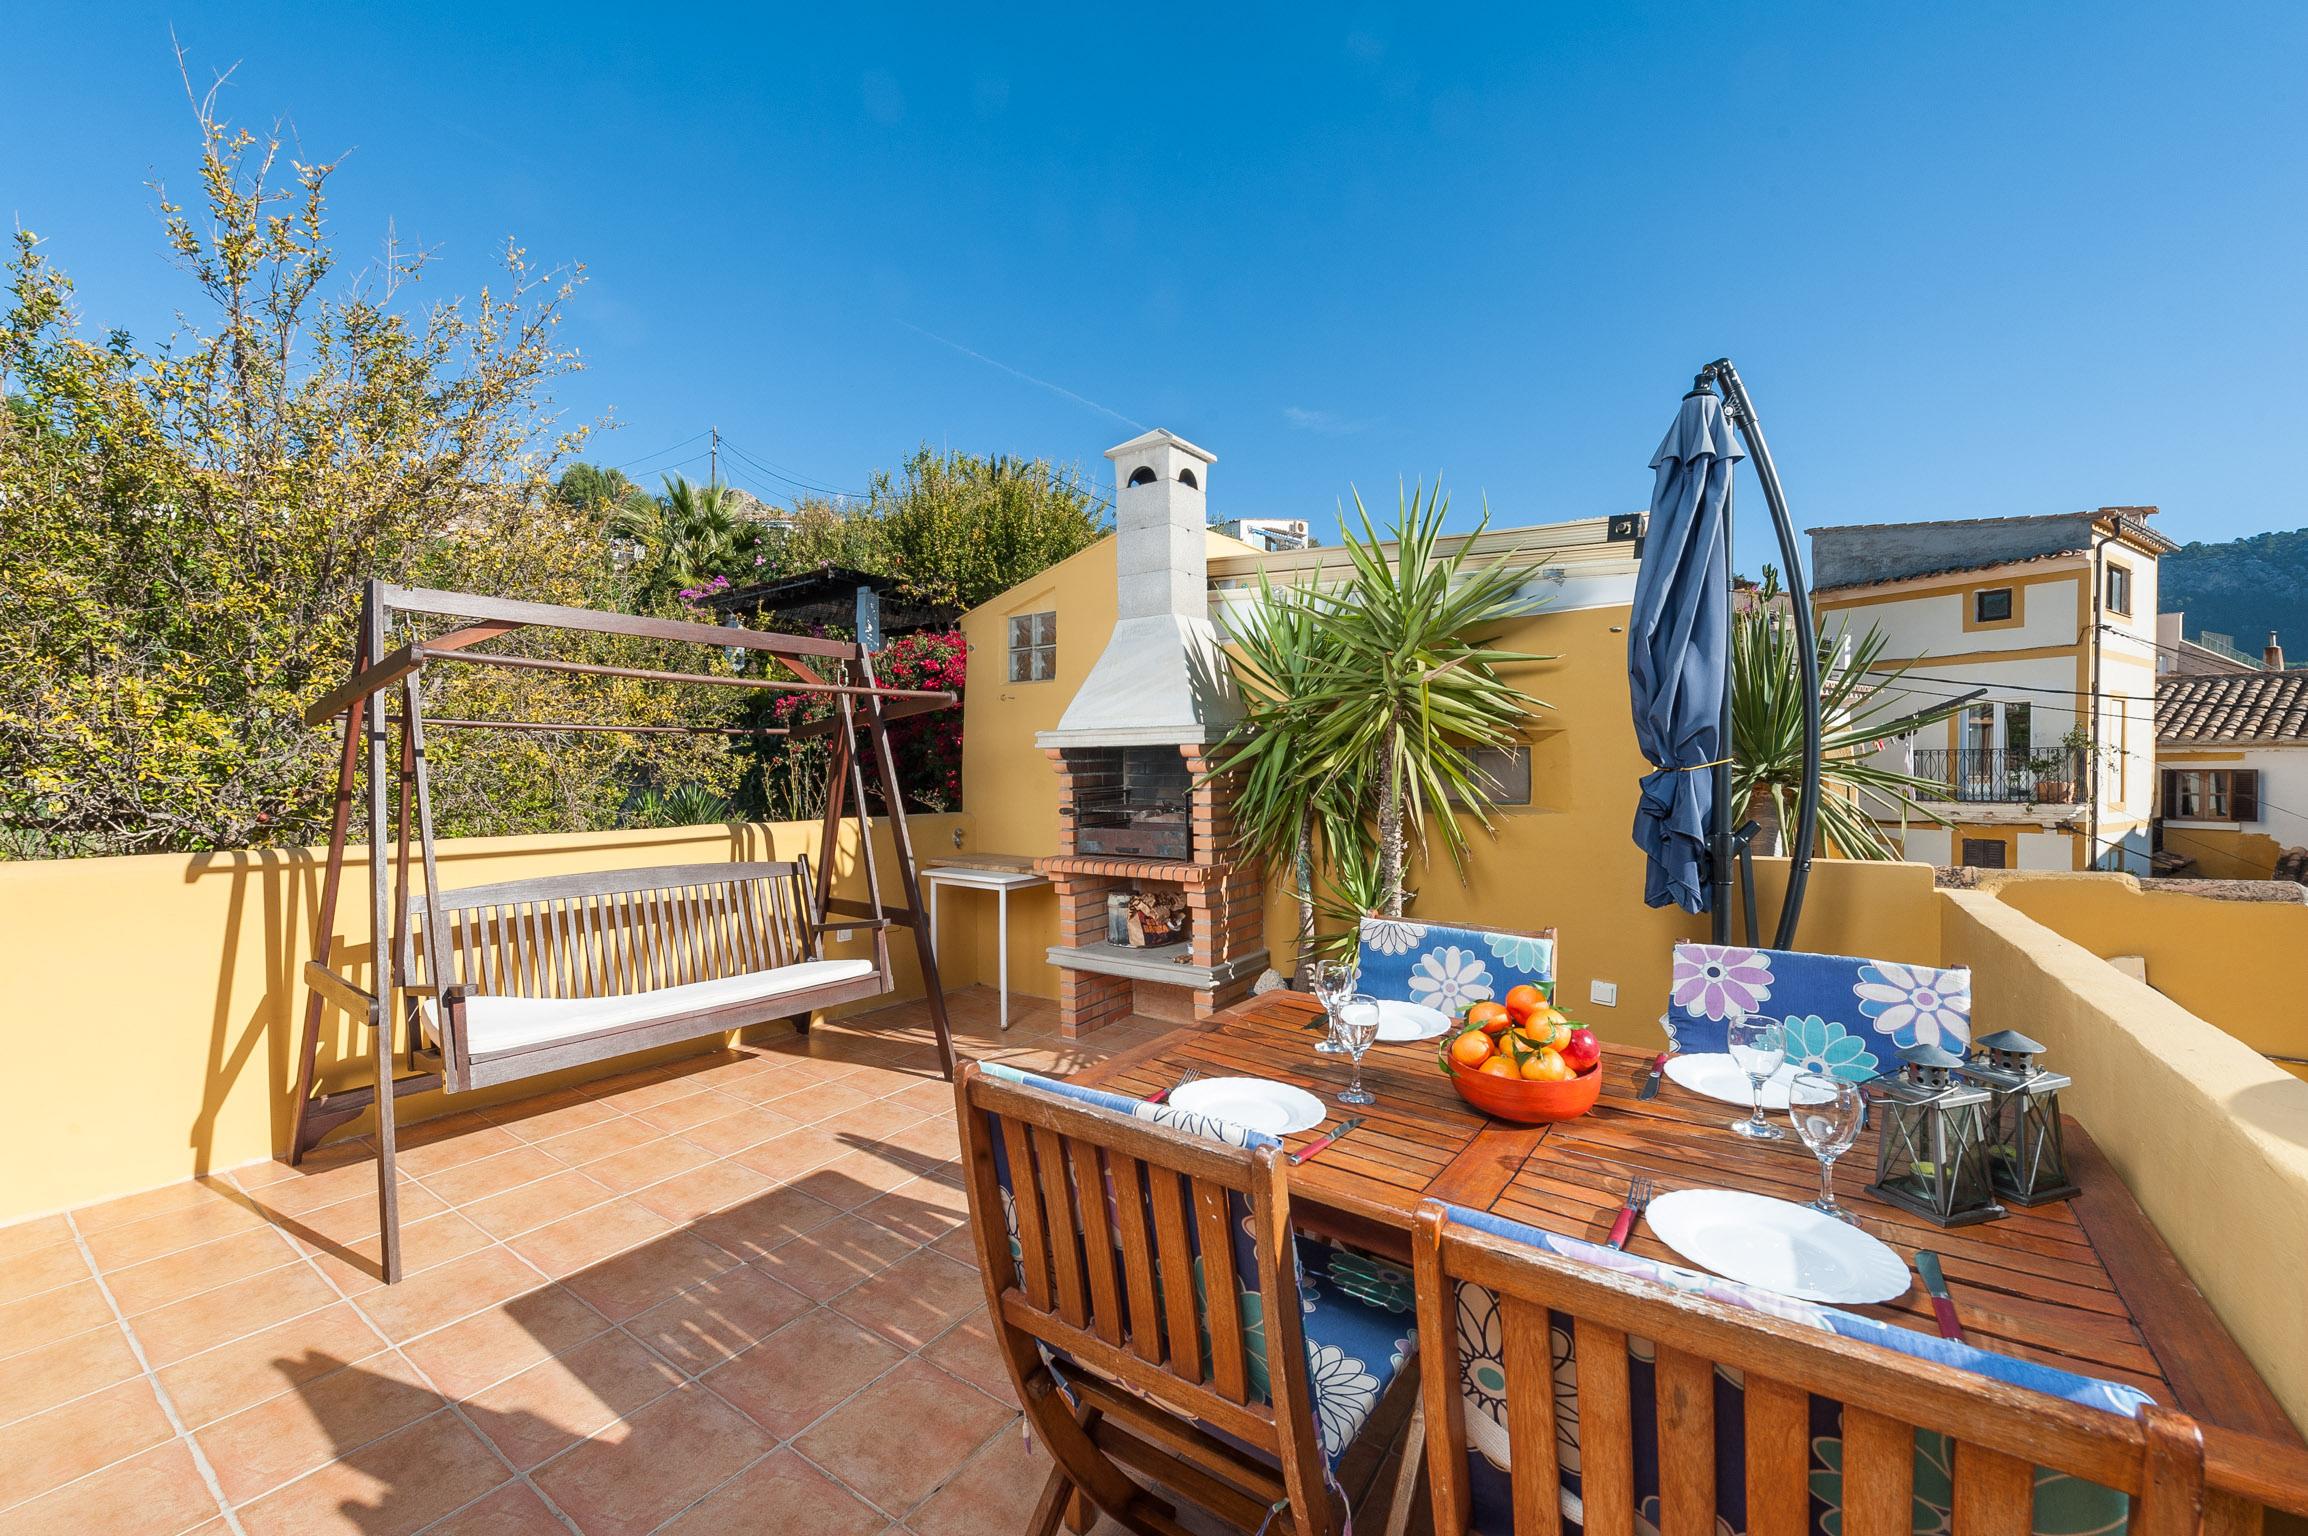 Property Image 2 - ELIAS NEIL HOUSE - Wonderful townhouse with spectacular views from the terrace. Free WiFi